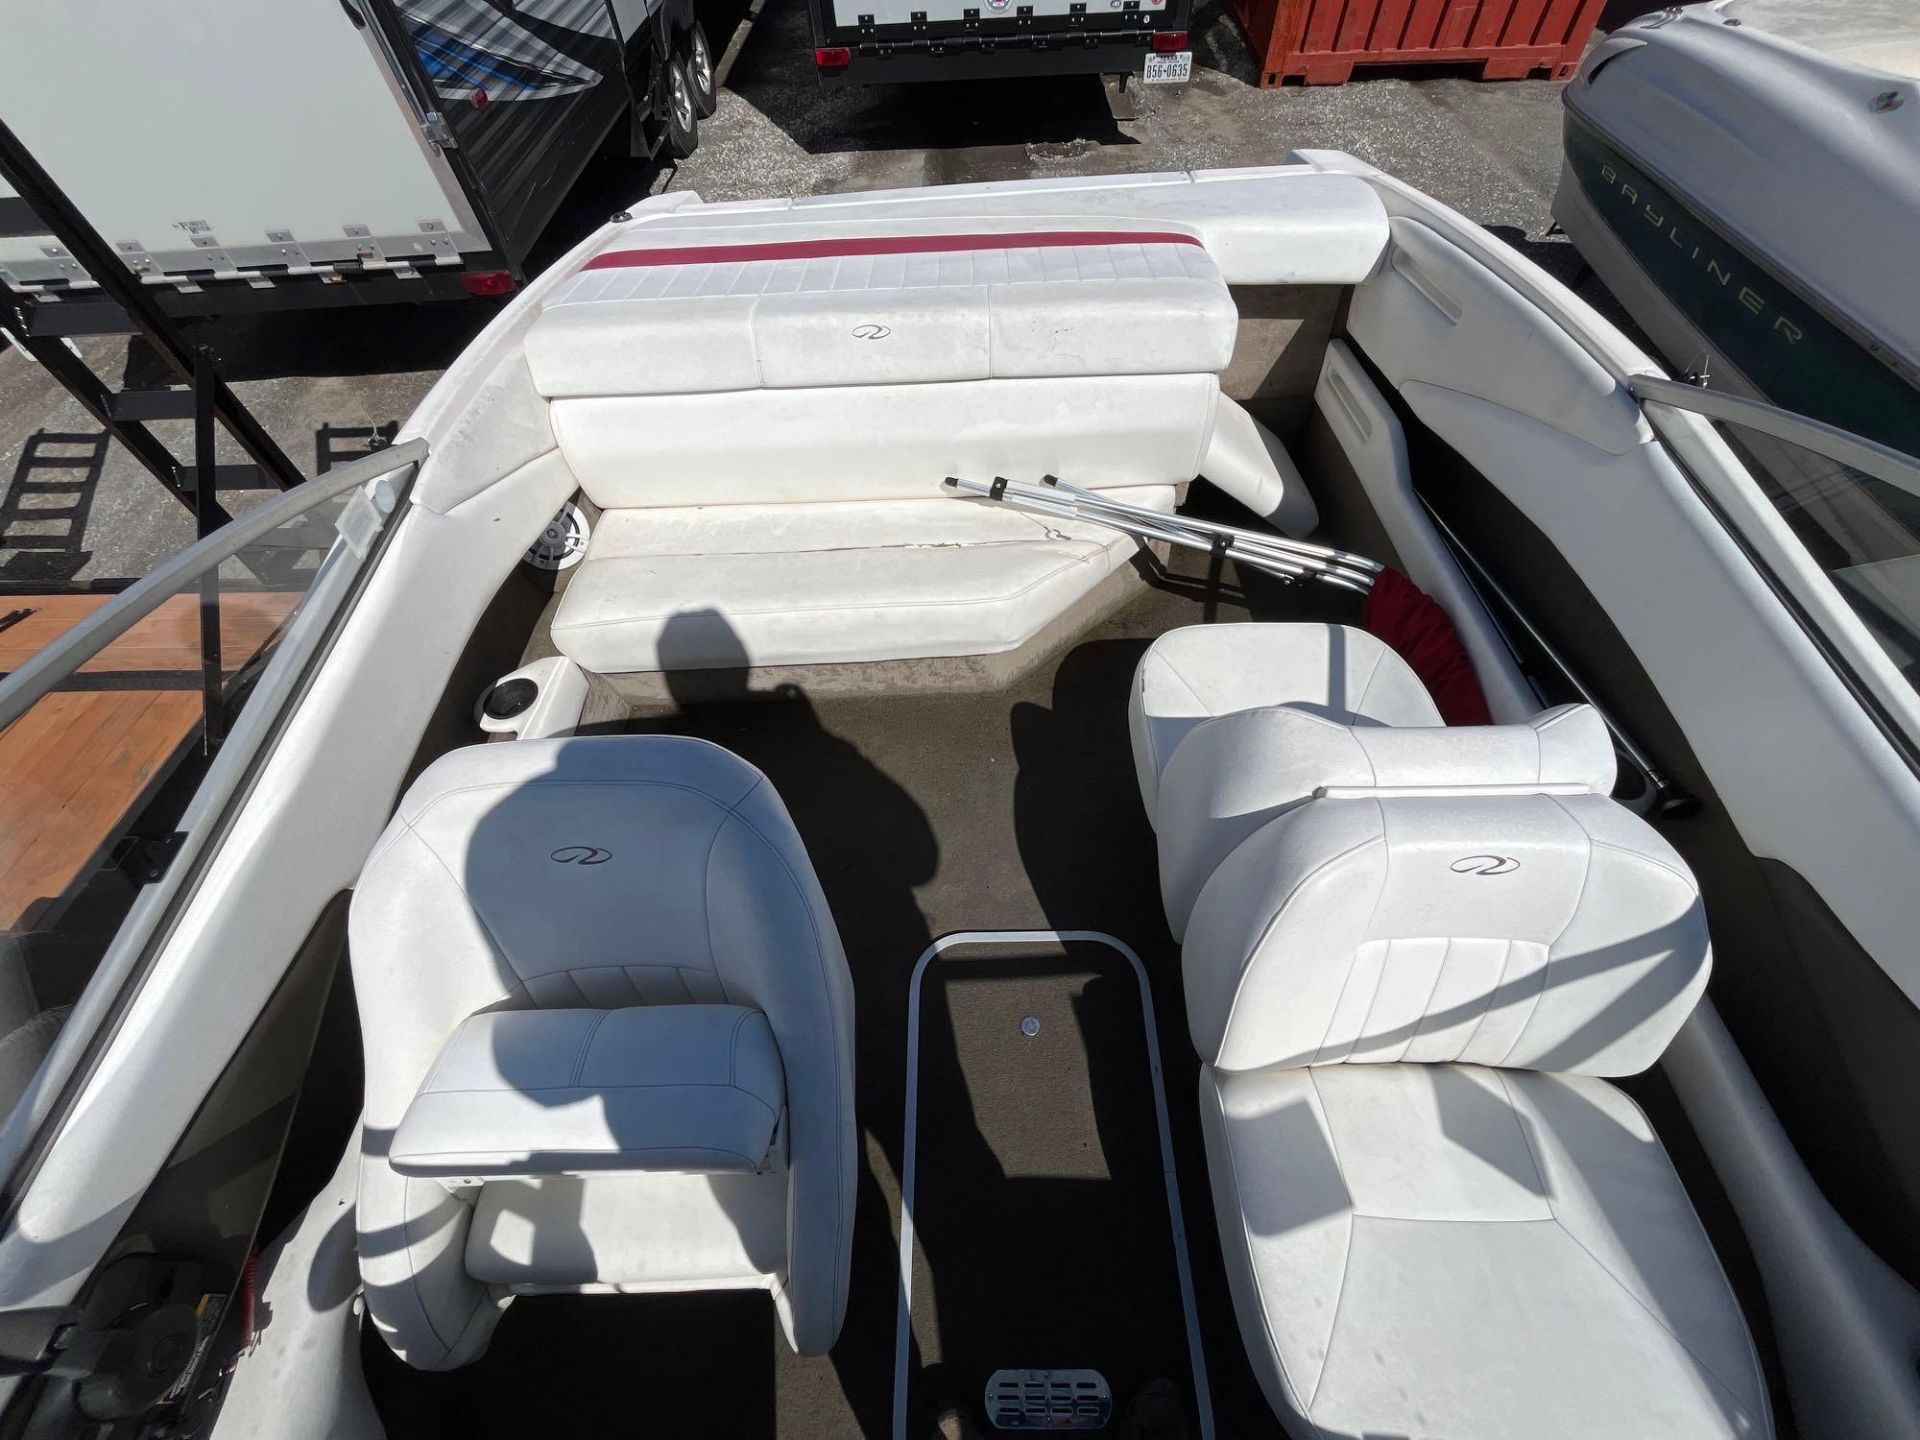 2005 Regal 1800 Boat And Marine Trailer - Image 10 of 16